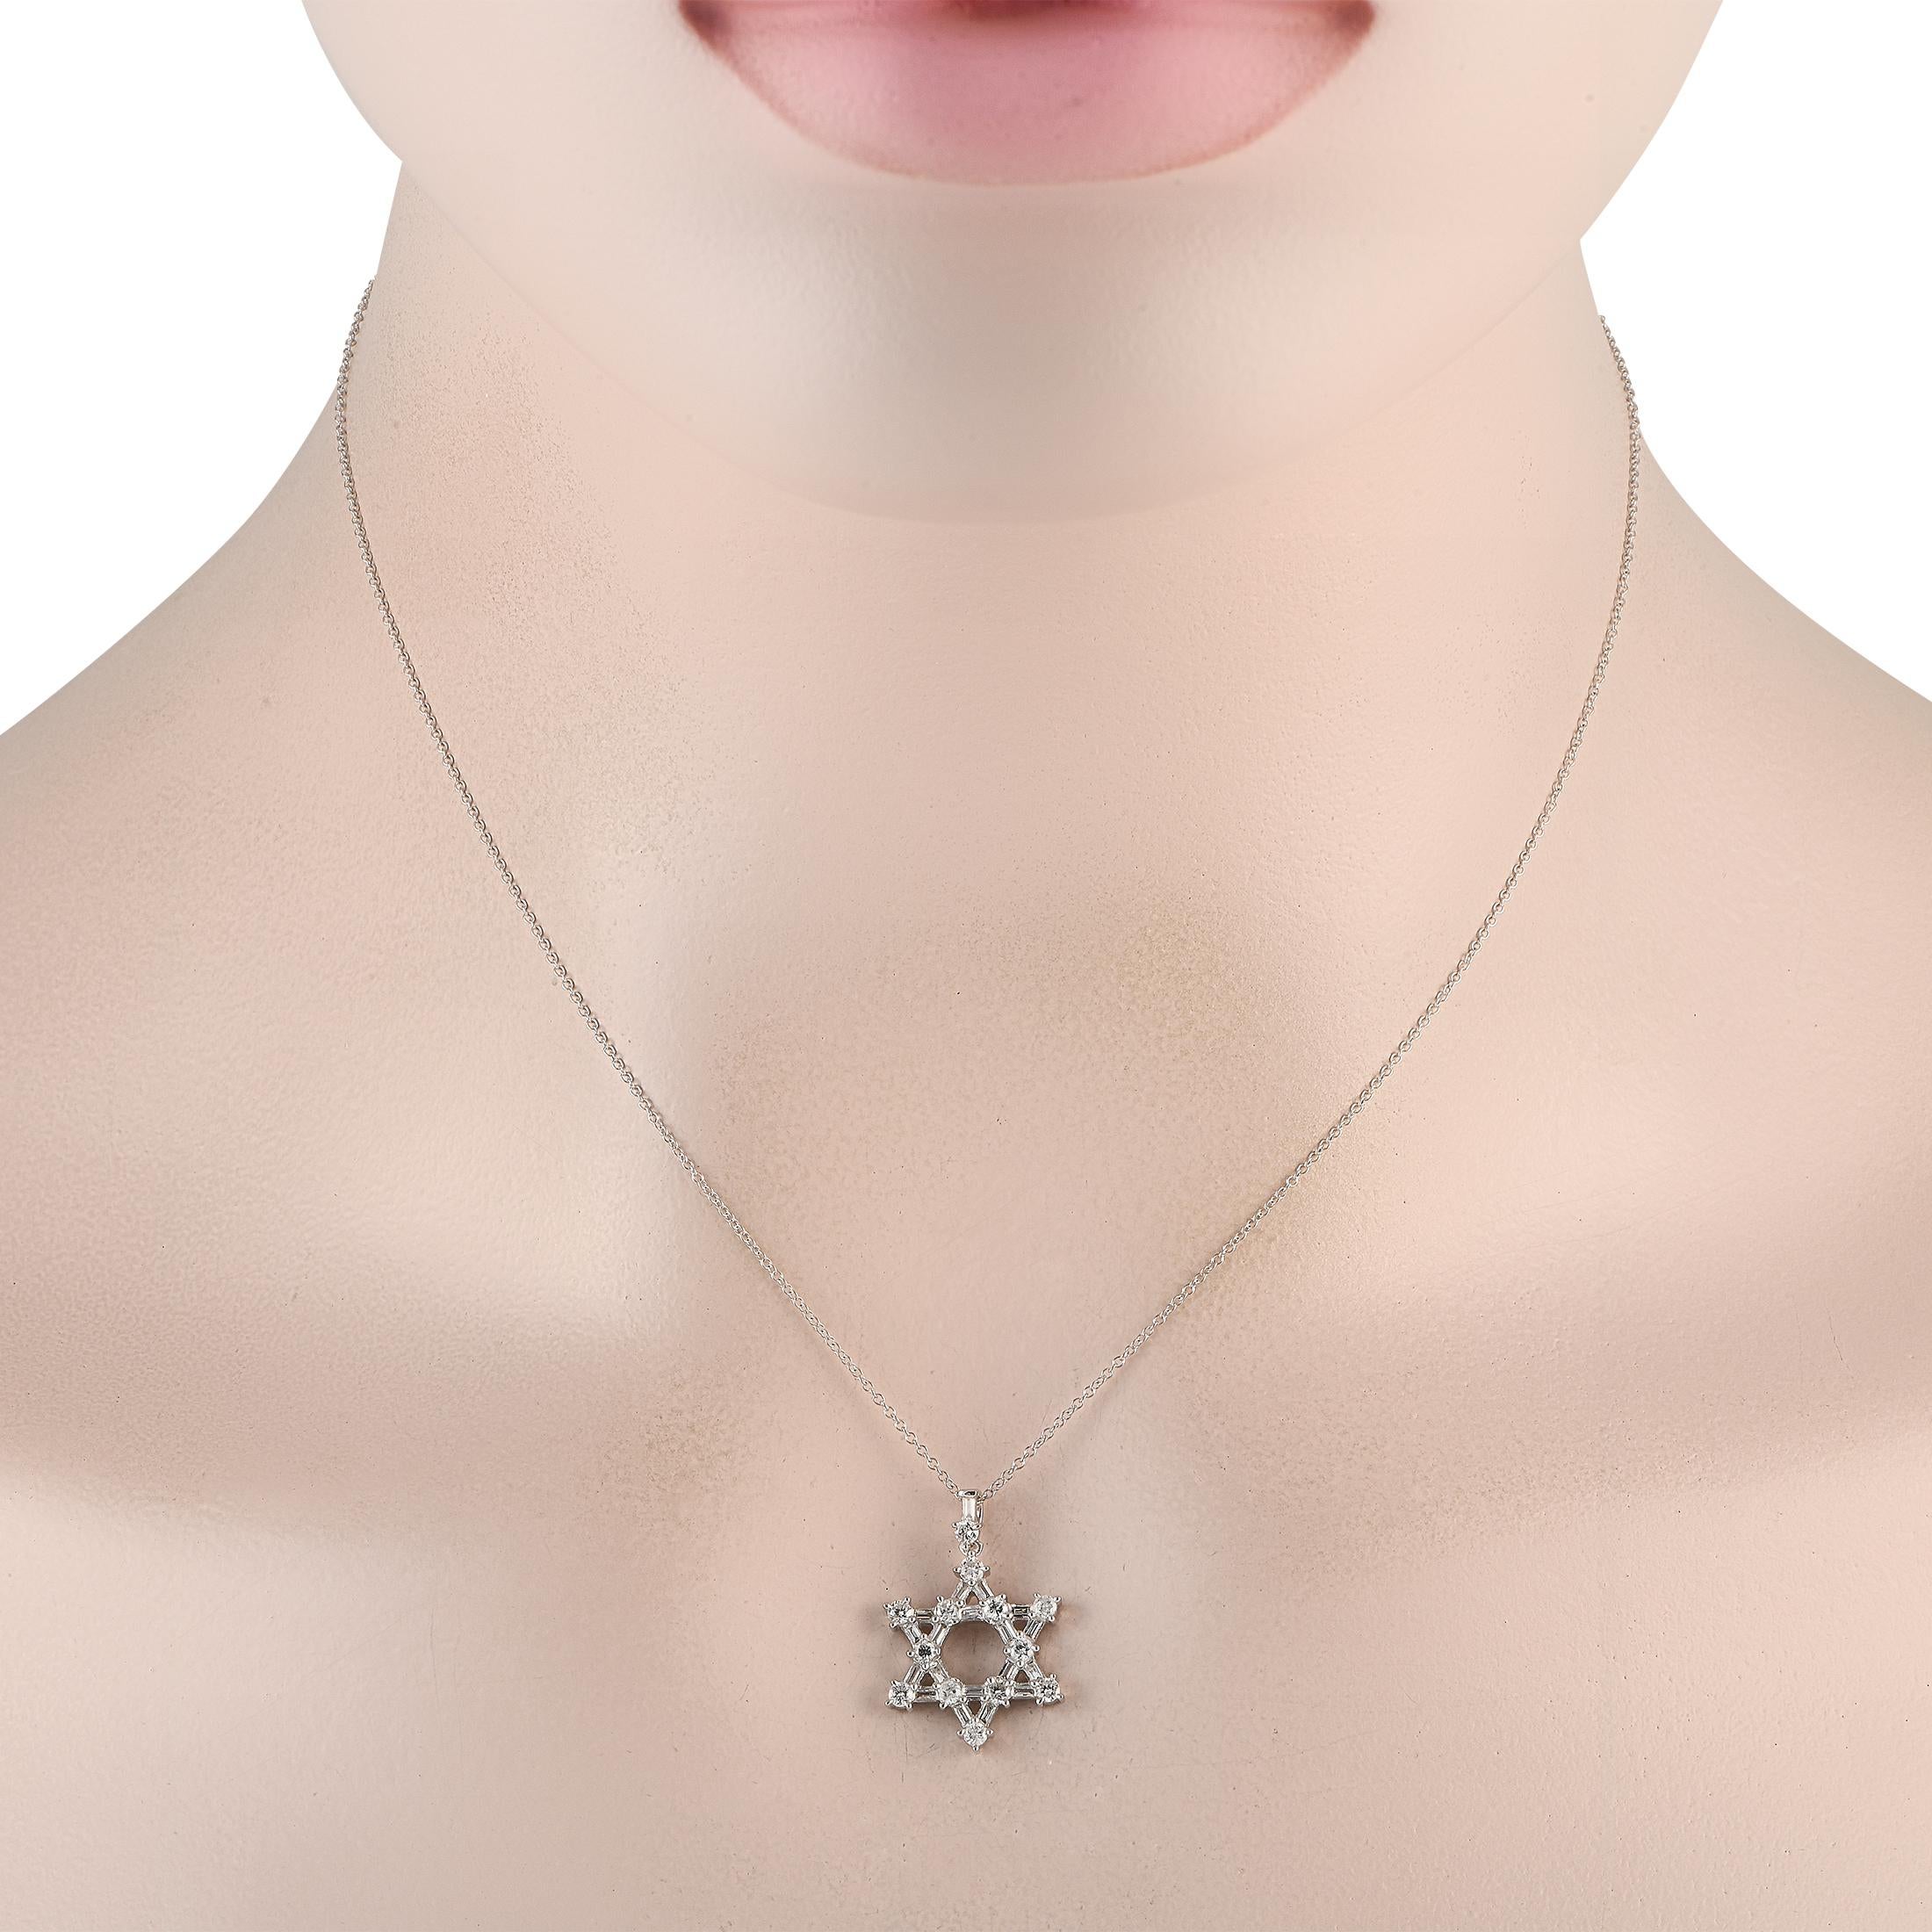 A stellar choice for an everyday diamond necklace. This piece features a thin cable chain measuring 16 inches long. It holds a six-point star pendant punctuated by 12 round diamonds, each on a four-prong setting. The bail is also dotted with a